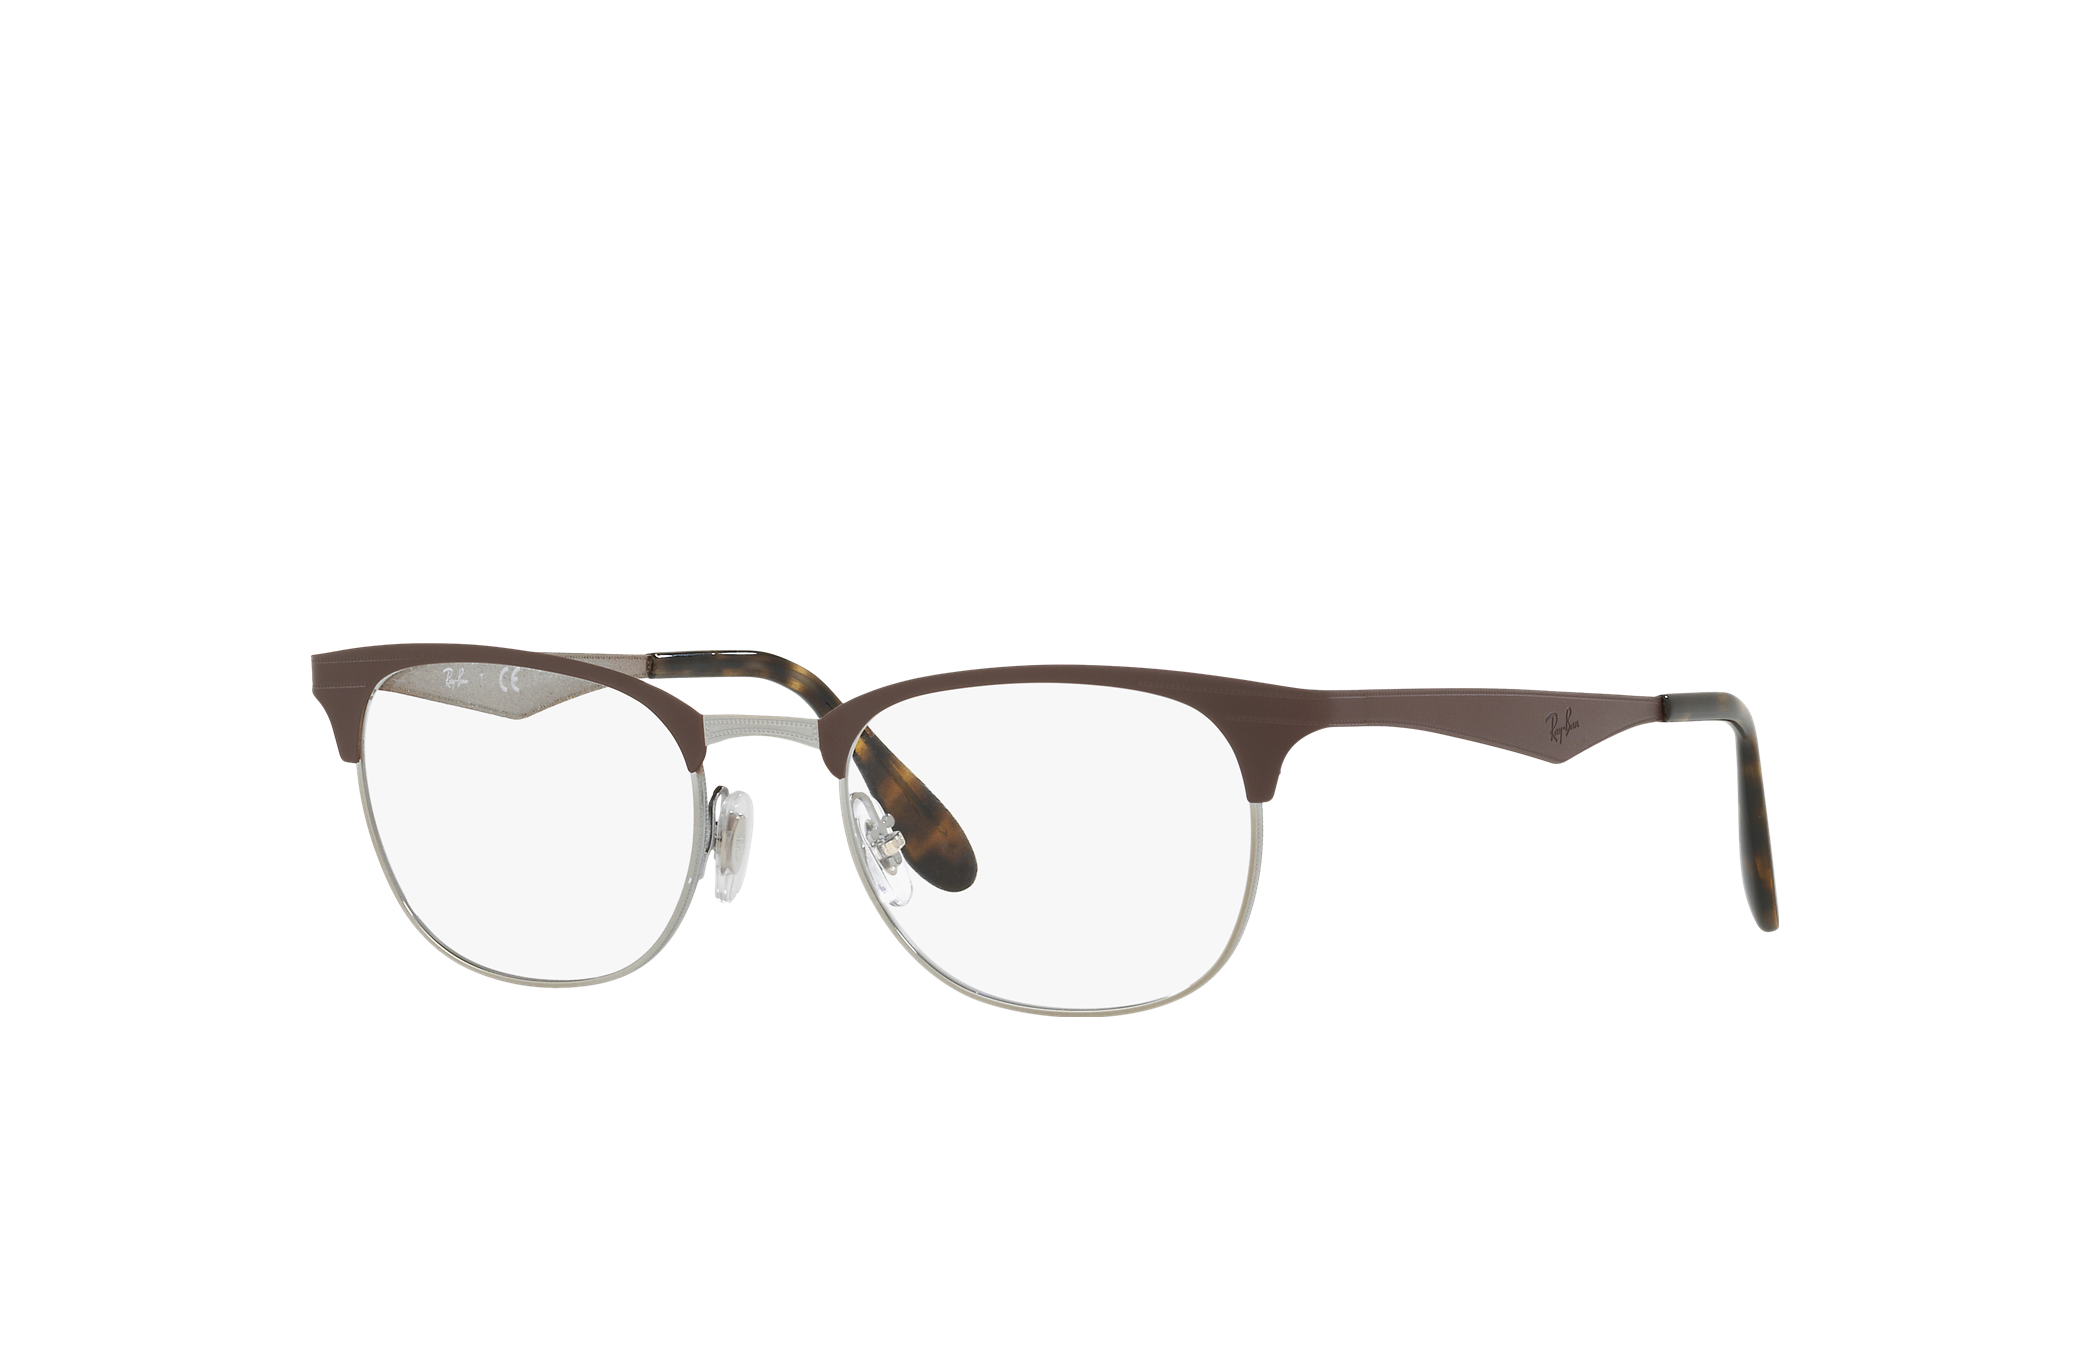 Rb6346 Eyeglasses with Brown Frame - RB6346 | Ray-Ban®